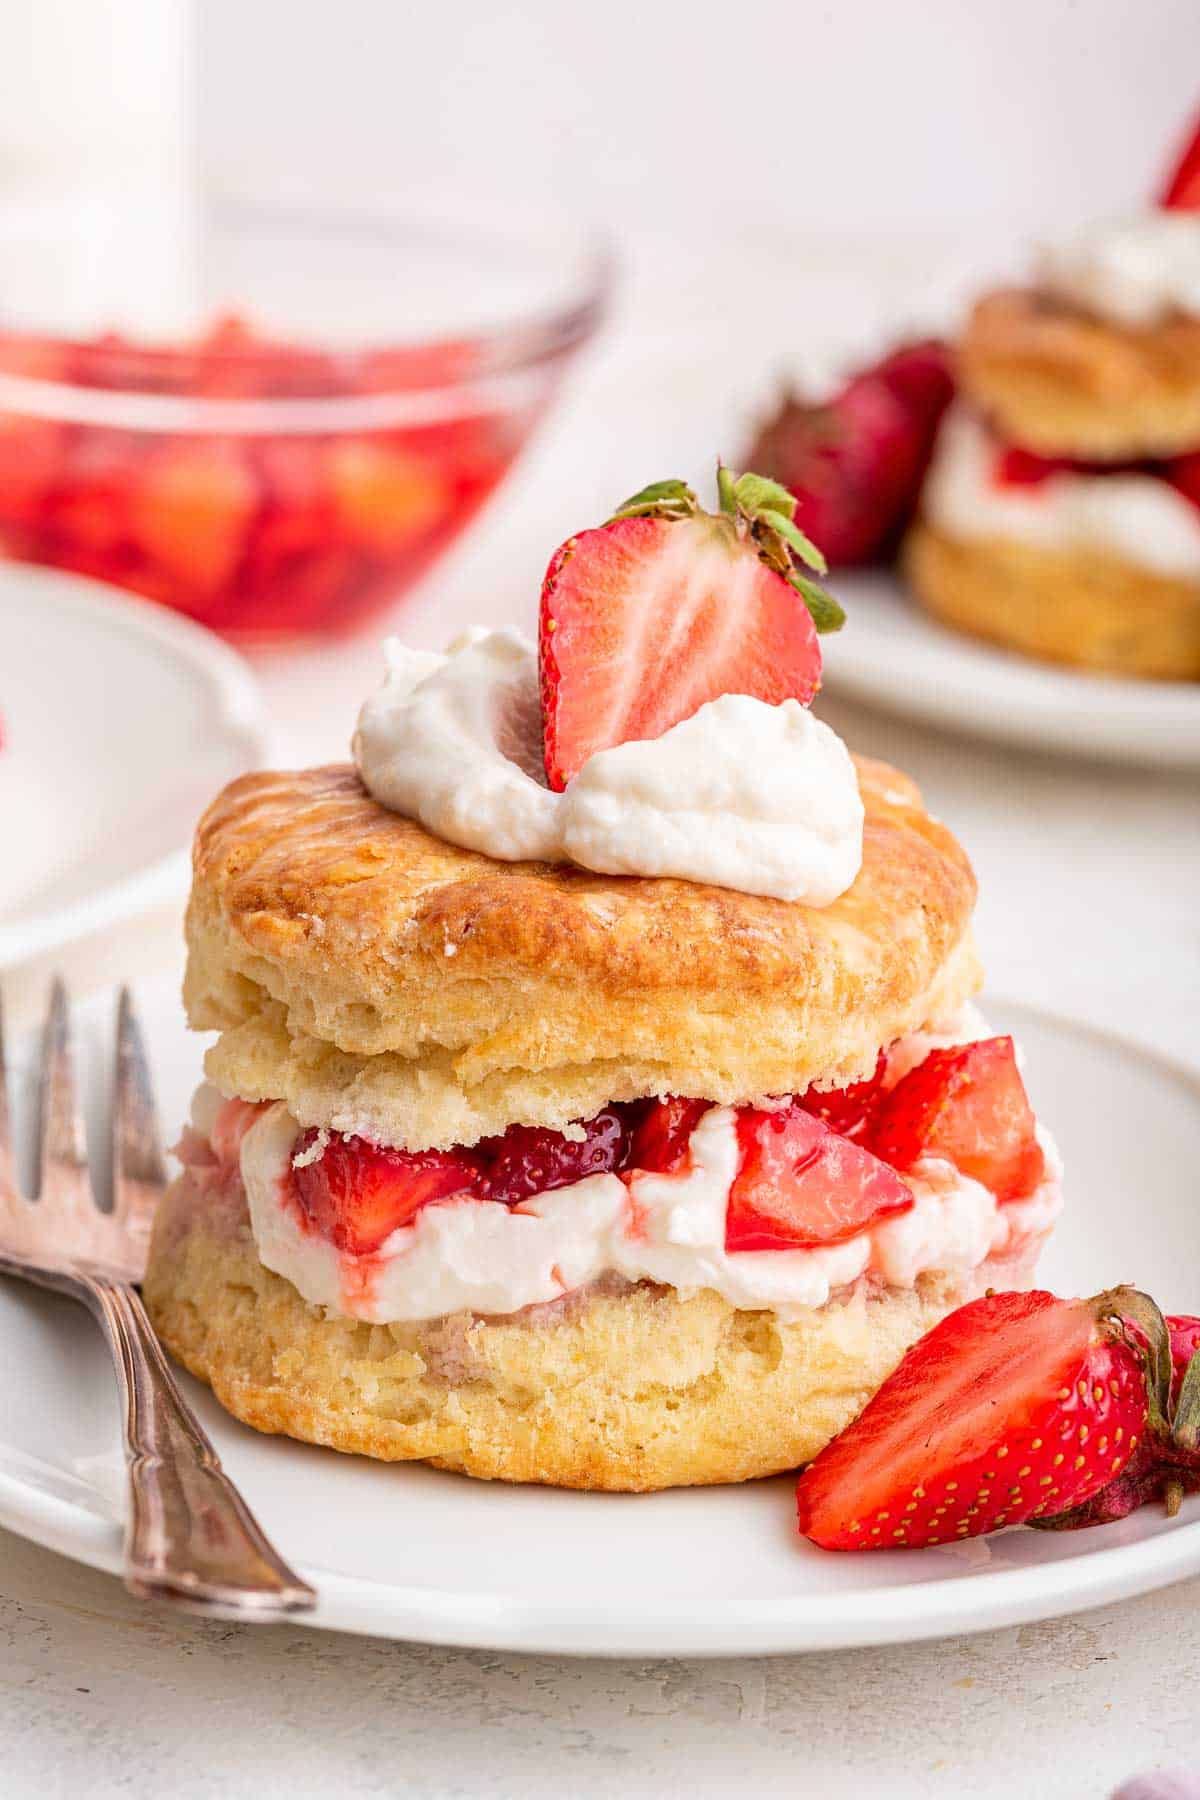 Close up image of strawberry shortcake with whipped cream and strawberry on top.